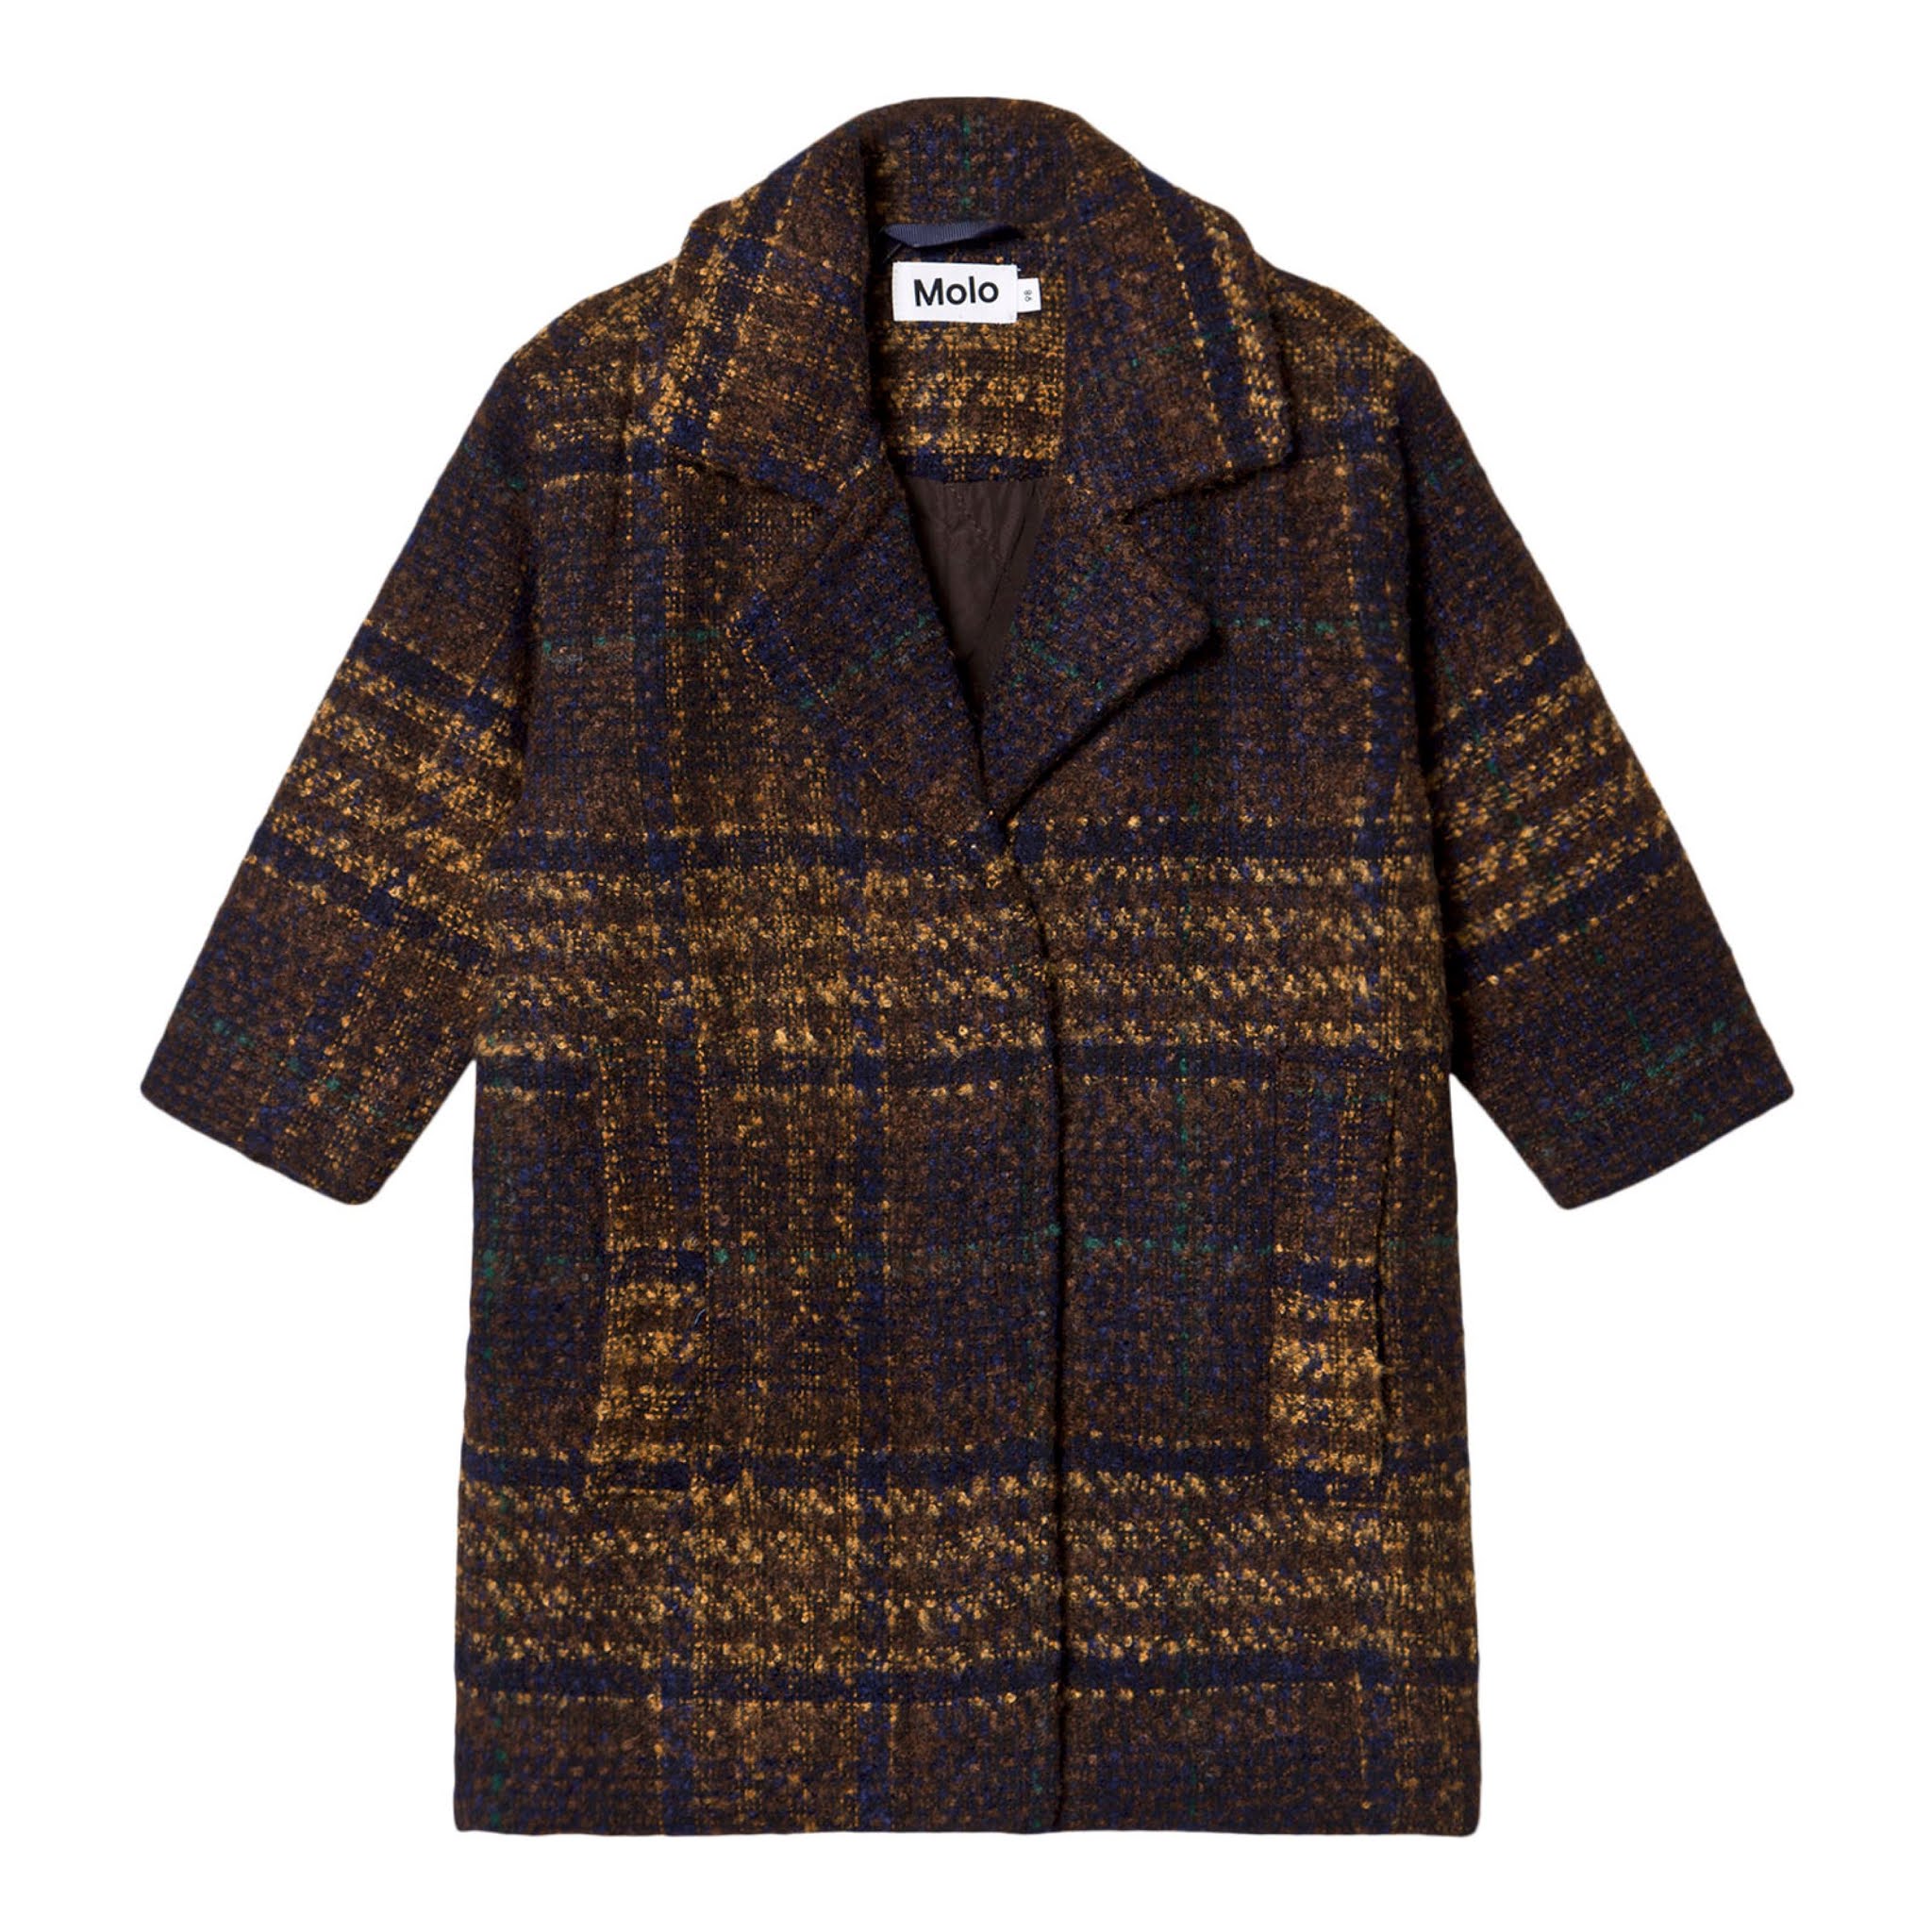 Kids Long Autumn Checkered Coat from Molo